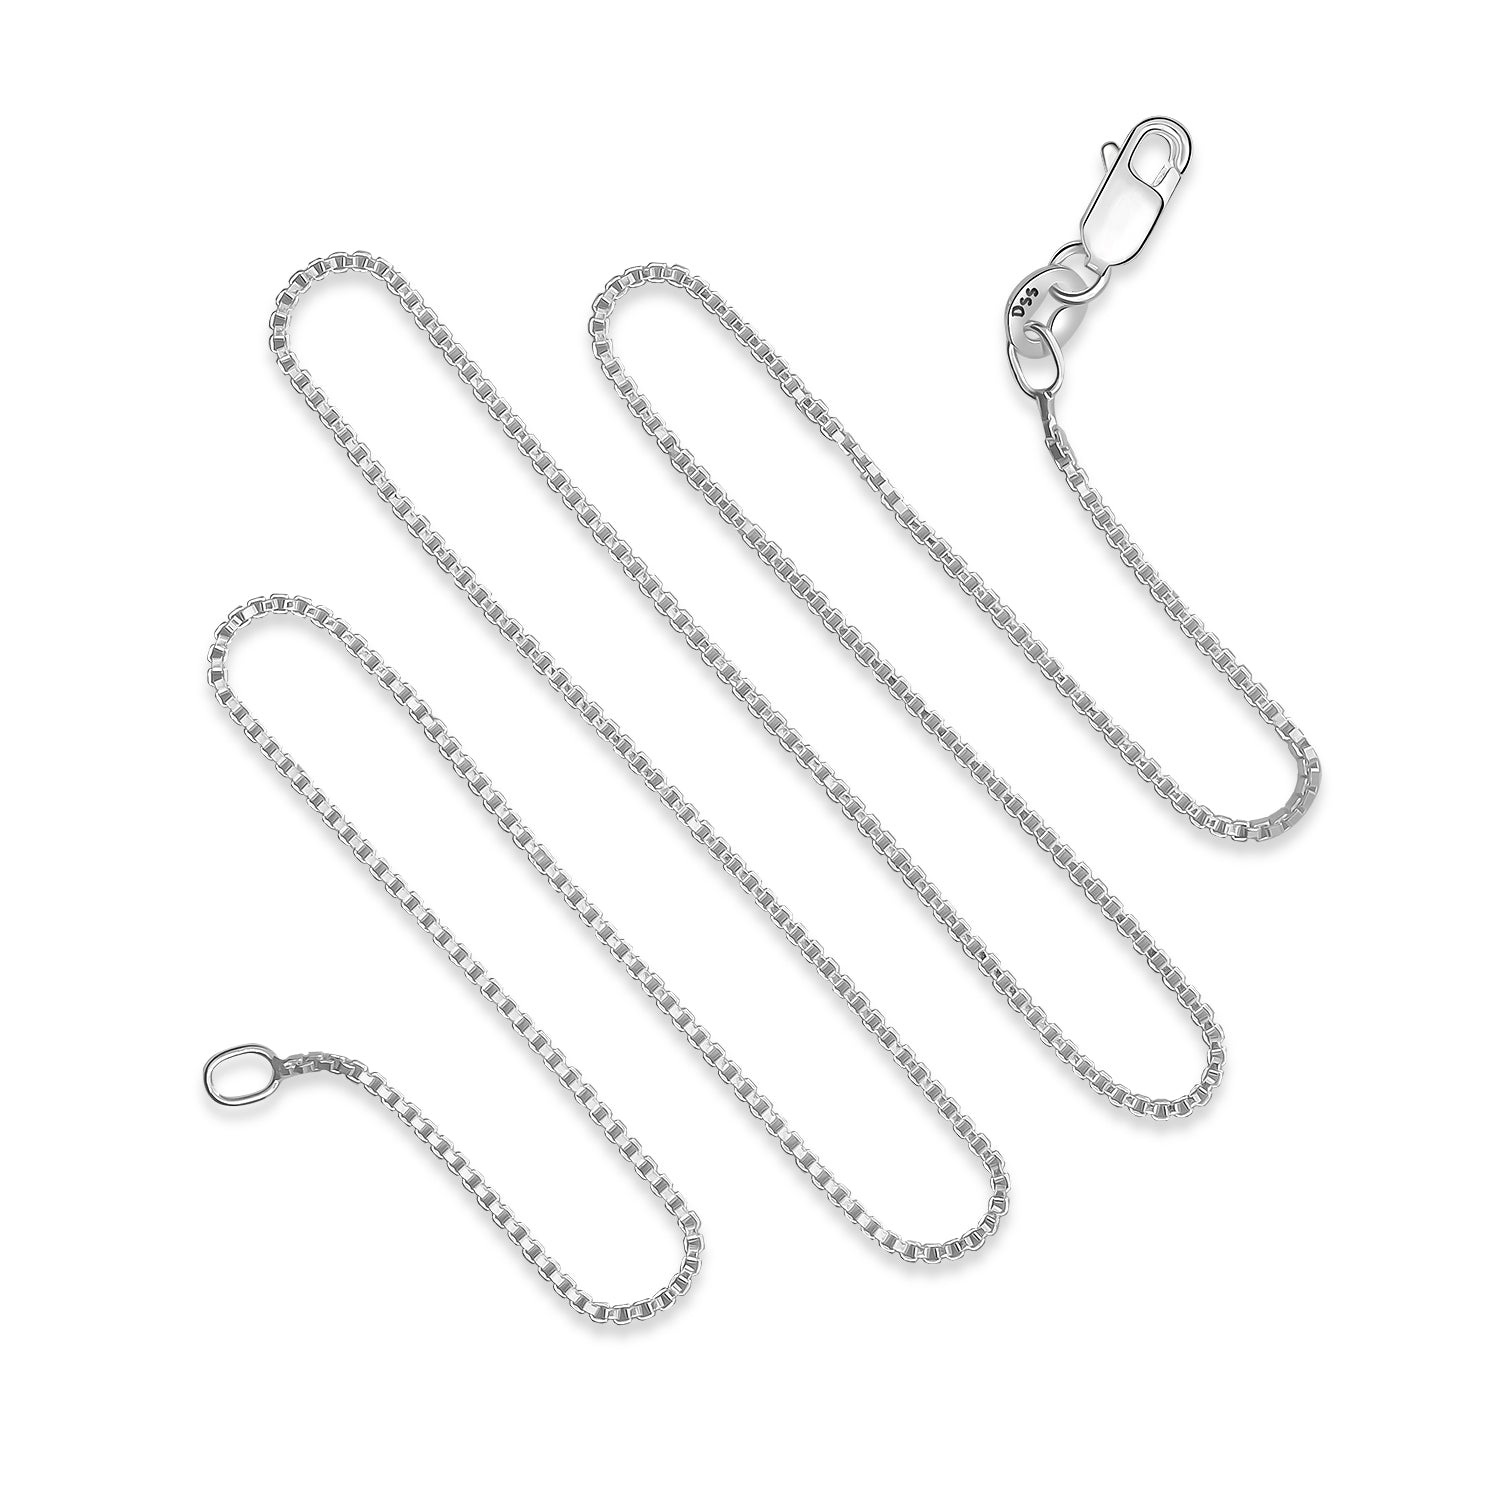 1MM Sterling Silver Box Chain with Lobster Claw Clasp 16"-30" perfect for pendants. this is a strong chain and one of the very most popular chains.